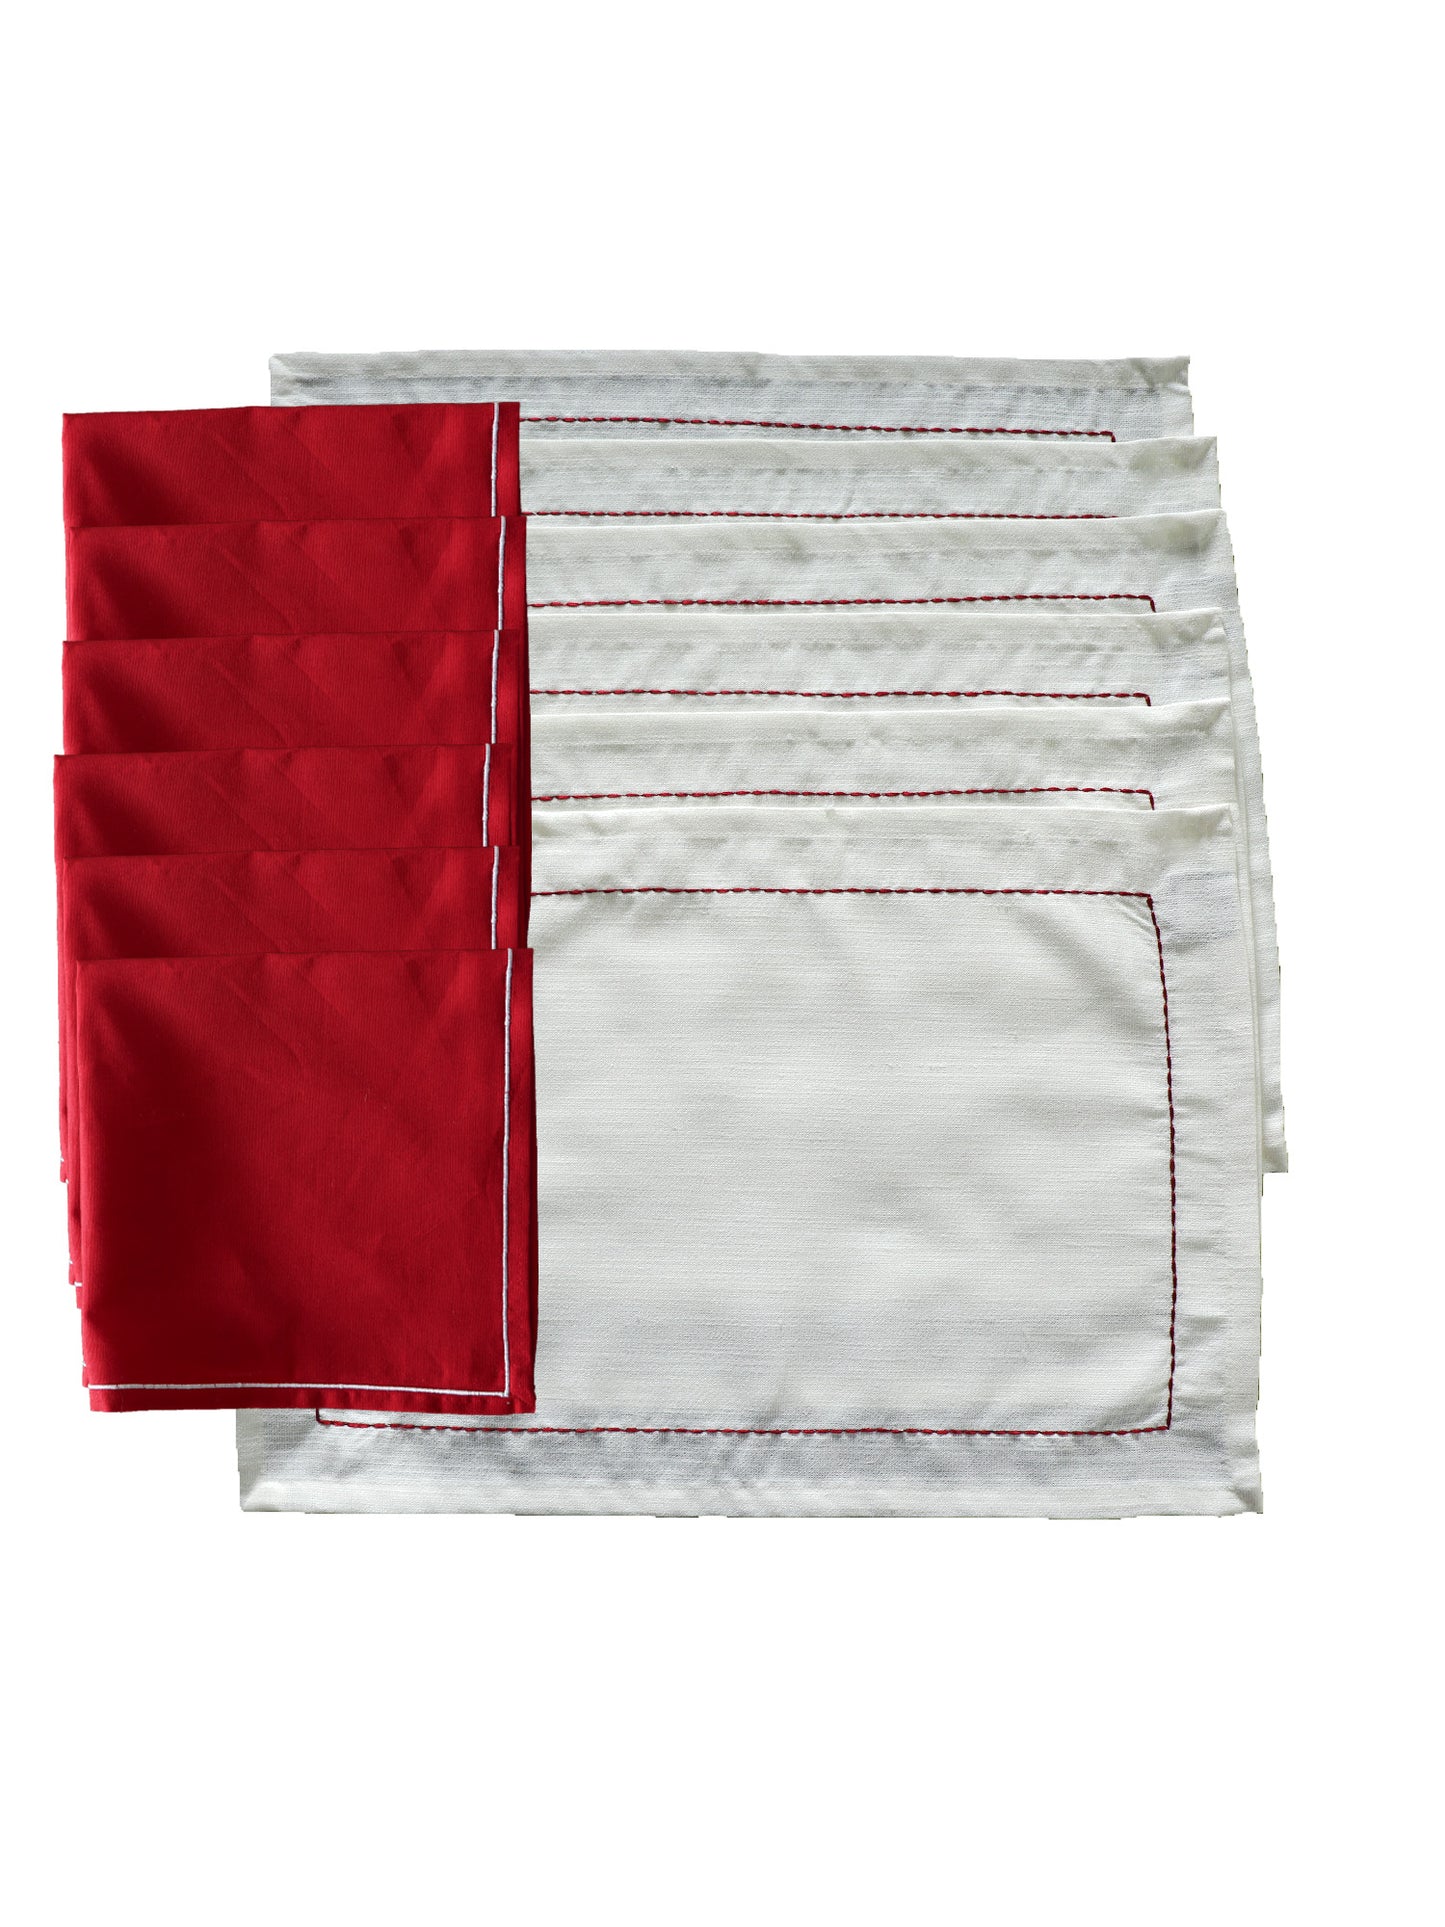 embroidered dinner table placemats and embroidered napkins in white and red contrast - 13x19 inch 